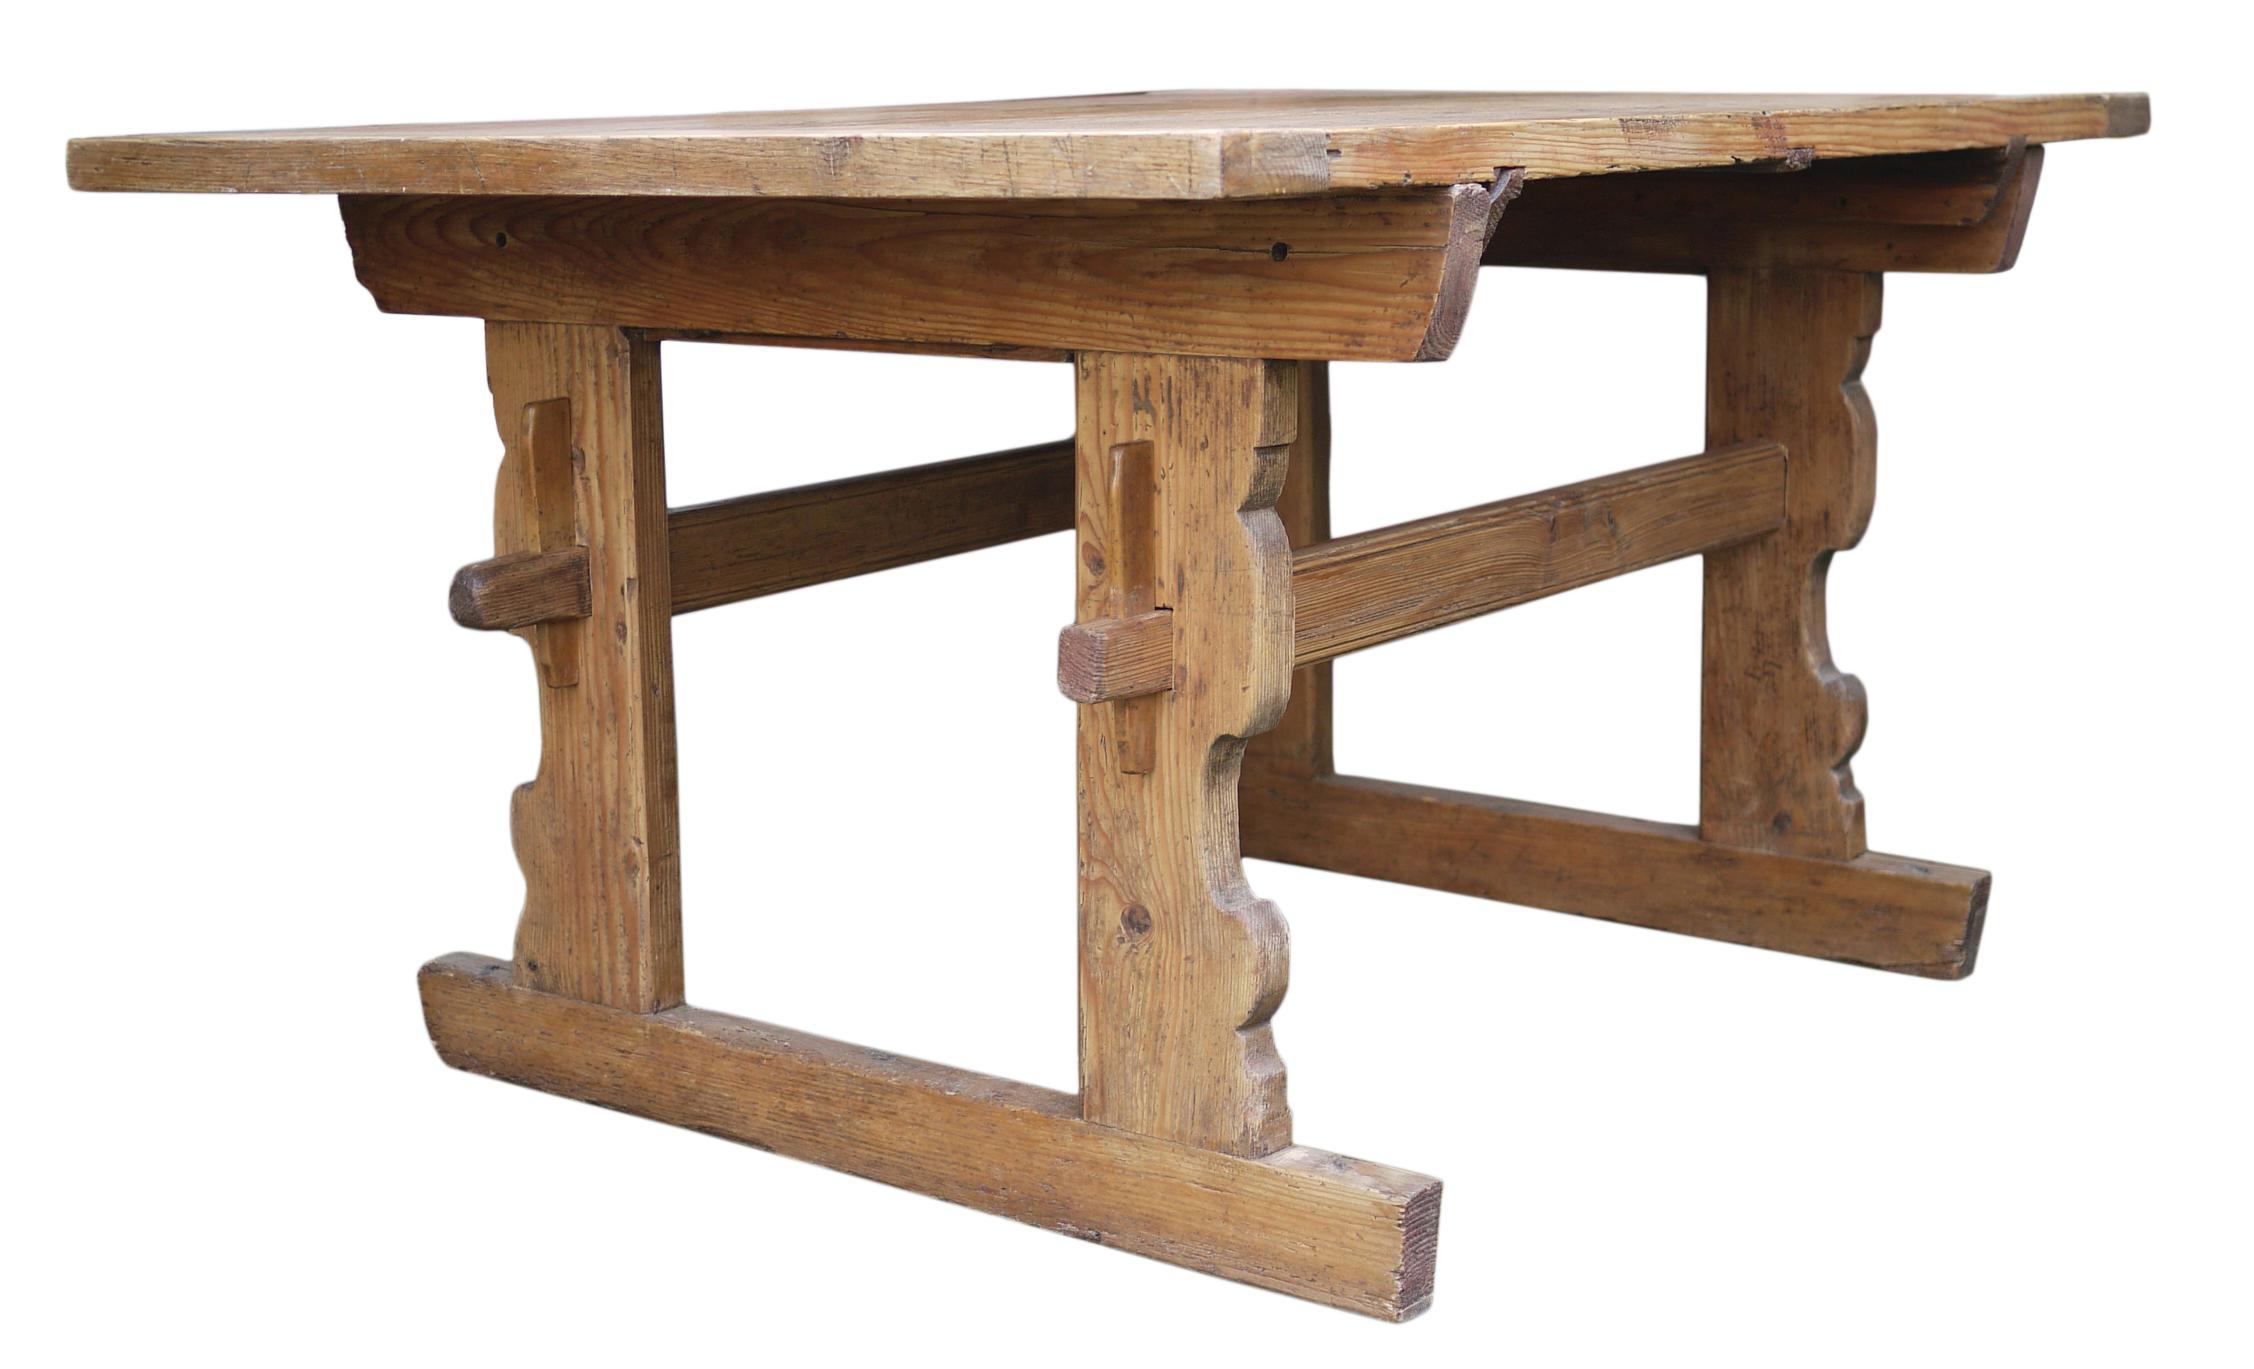 Antique fir dining table

H.78cm - Top 140cm x 107cm - extension 44cm (each)
H. 30.7 in - Top 55.1 in x 42.1 in - extension 17.3 in (each)

Rectangular fir wood table.
Two extensions (not original) in antique spruce were created.
Normal size